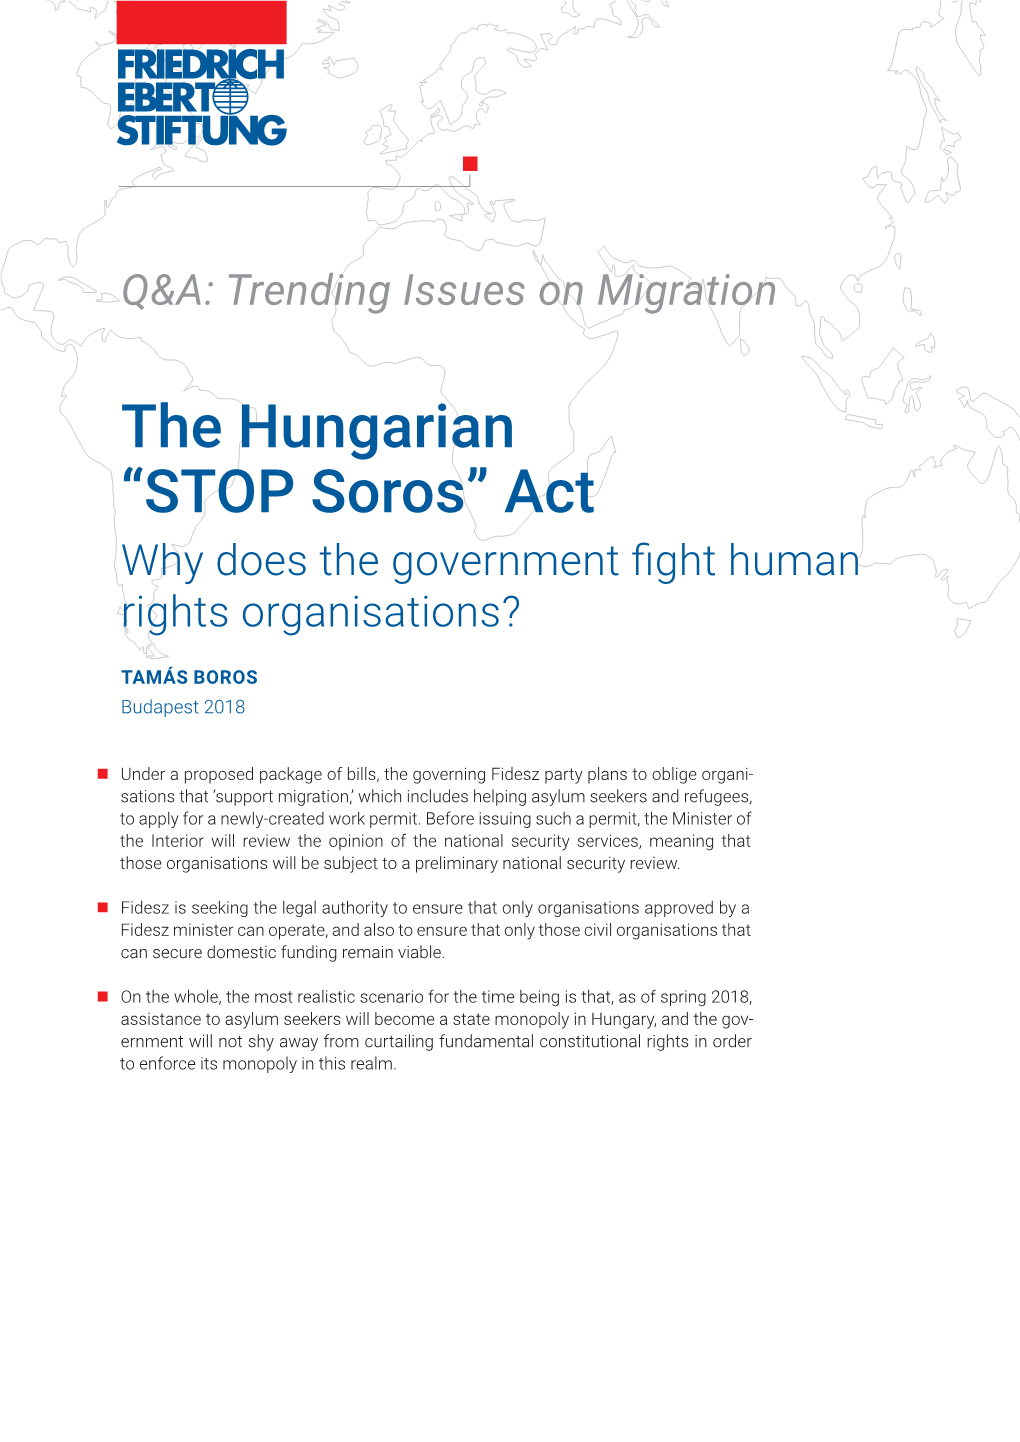 The Hungarian "Stop Soros" Act : Why Does the Government Fight Human